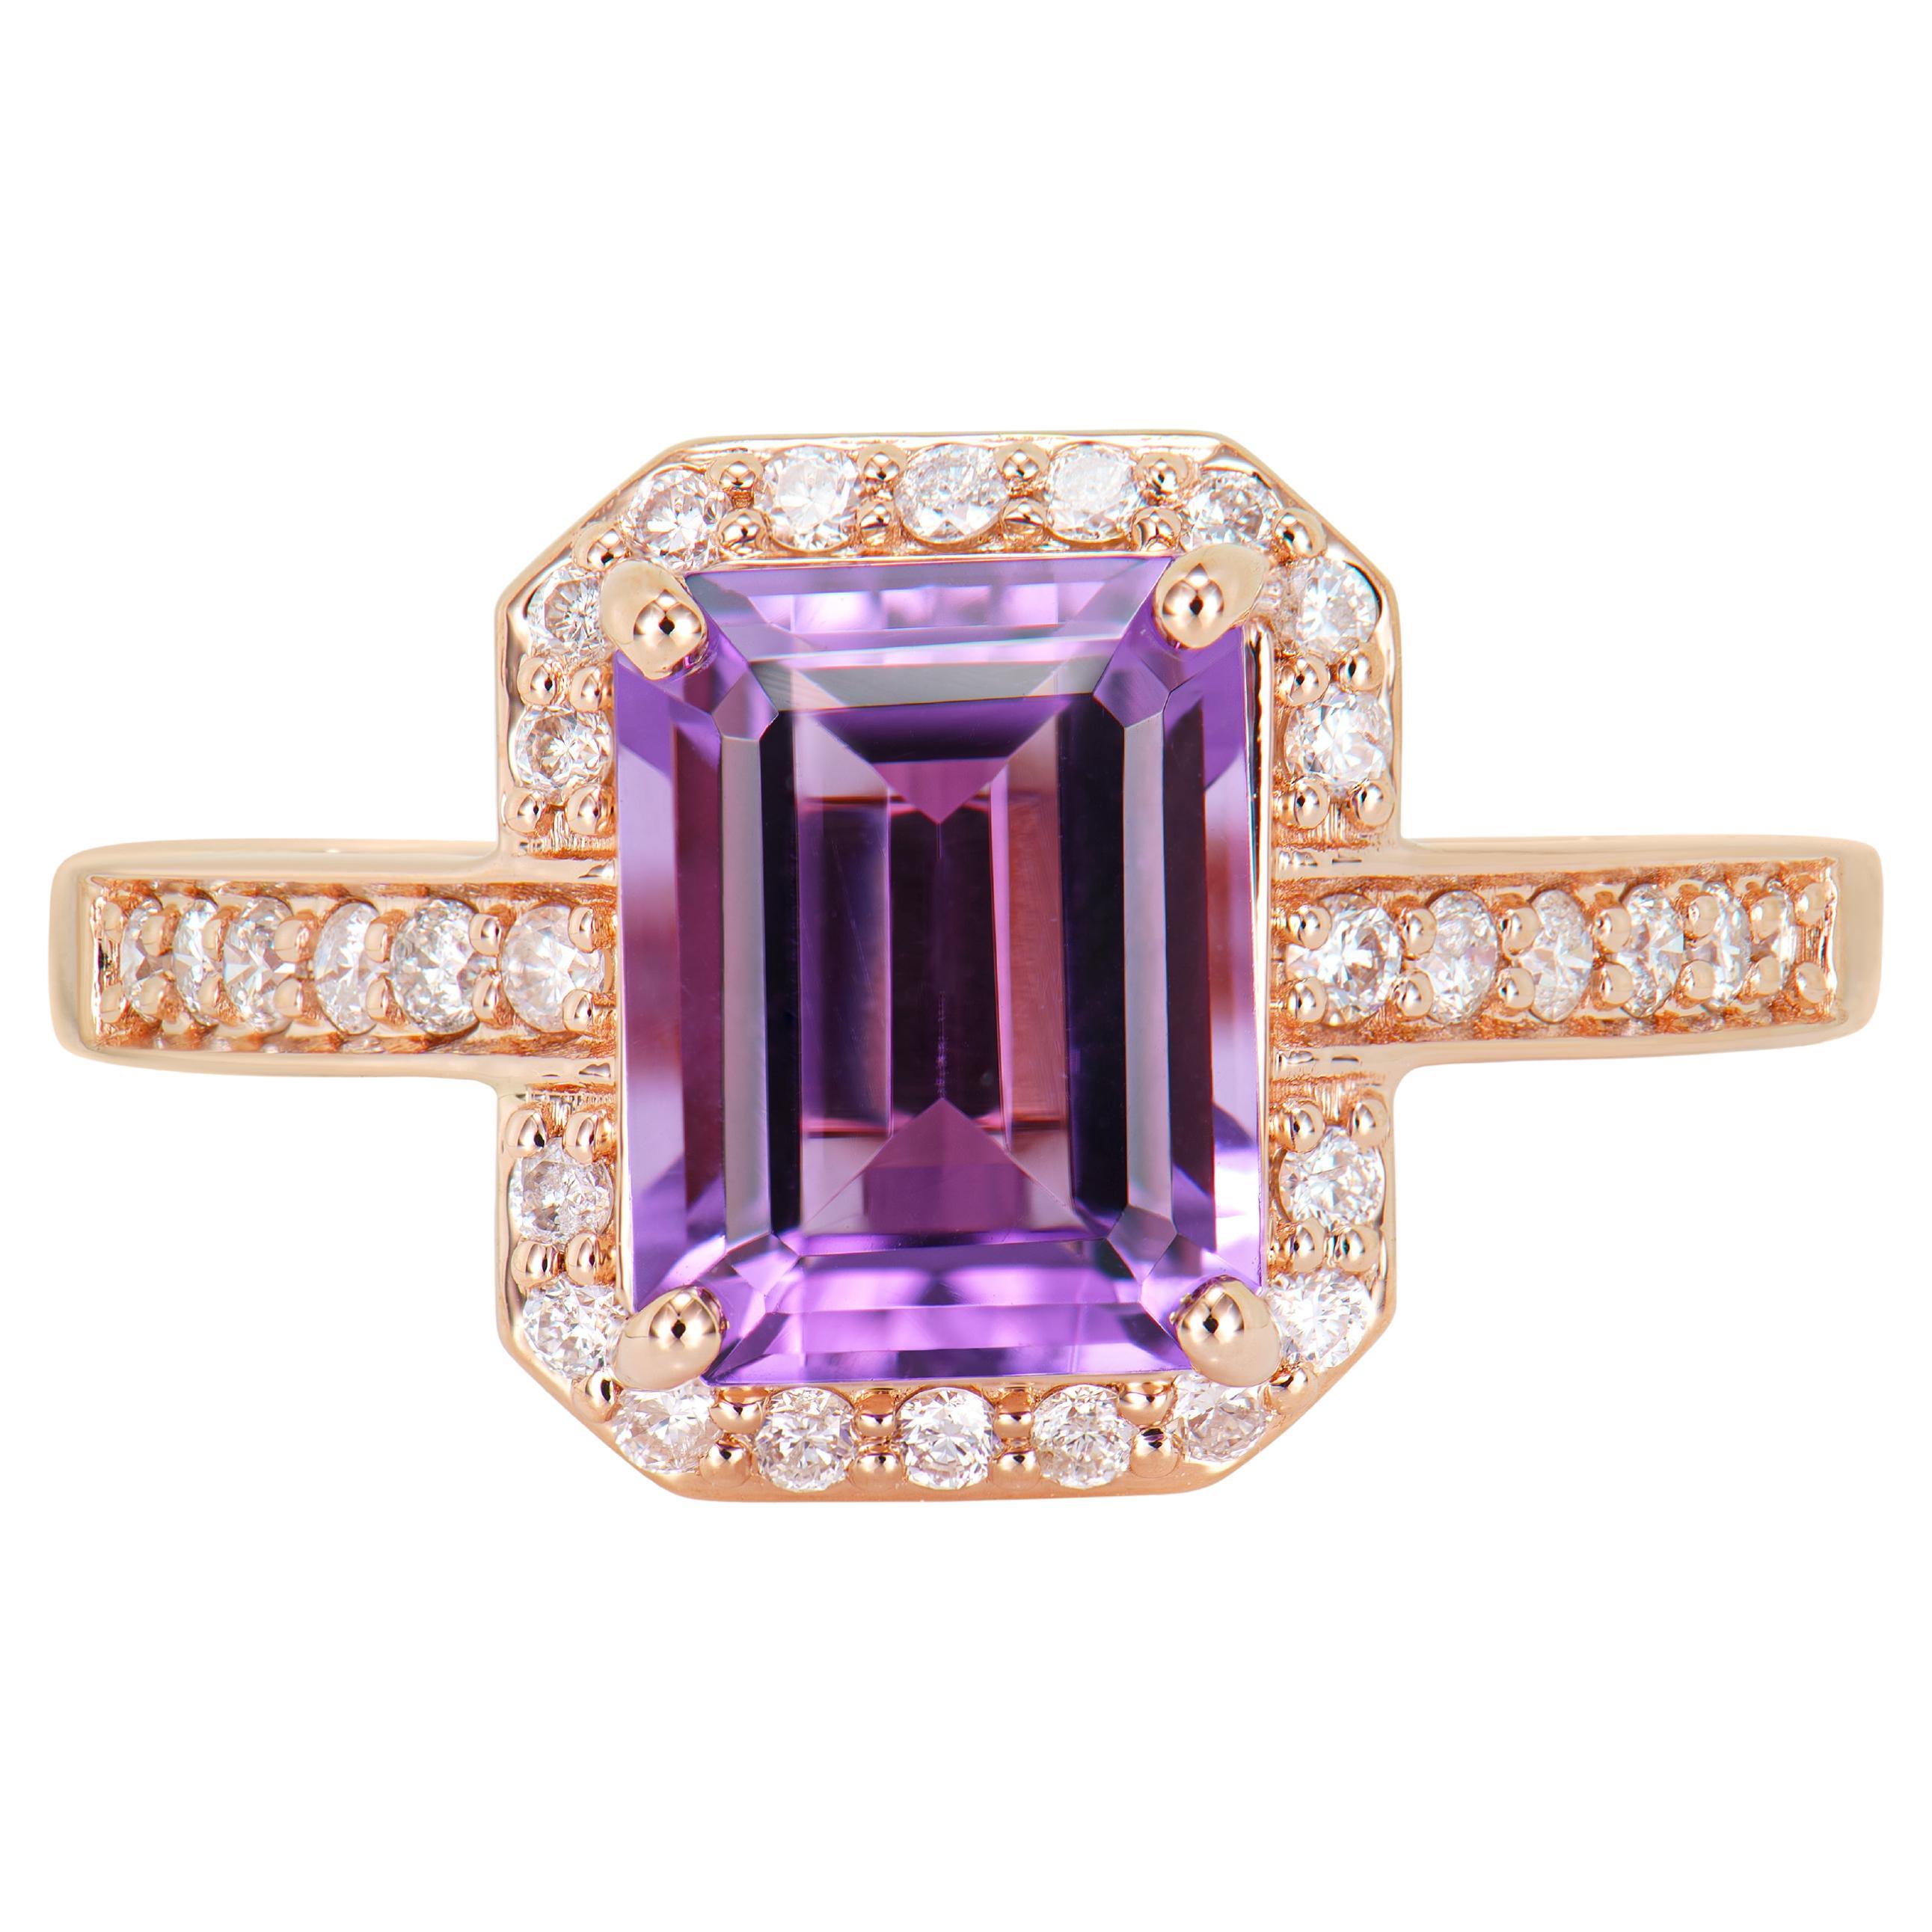 2.31 Carat Amethyst Fancy Ring in 14Karat Rose Gold with White Diamond.   For Sale